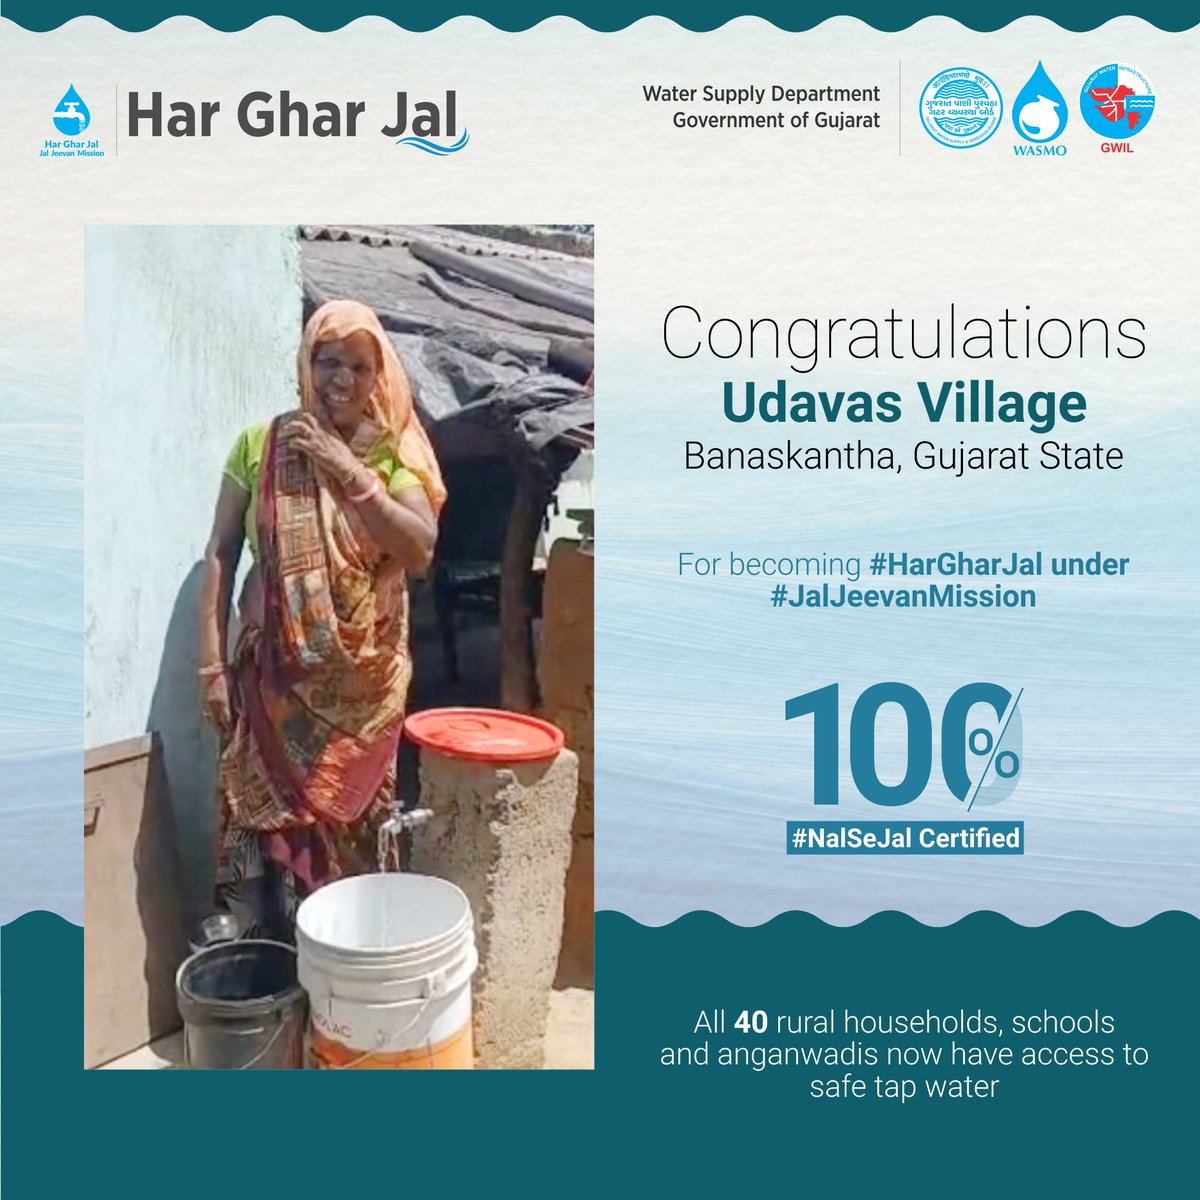 Congratulations to all the people of Udavas Village of #Banaskantha, #Gujarat State, for becoming 100% #HarGharNalSeJal certified. All 40 rural households, schools and anganwadis are now getting safe tap water under #JalJeevanMission